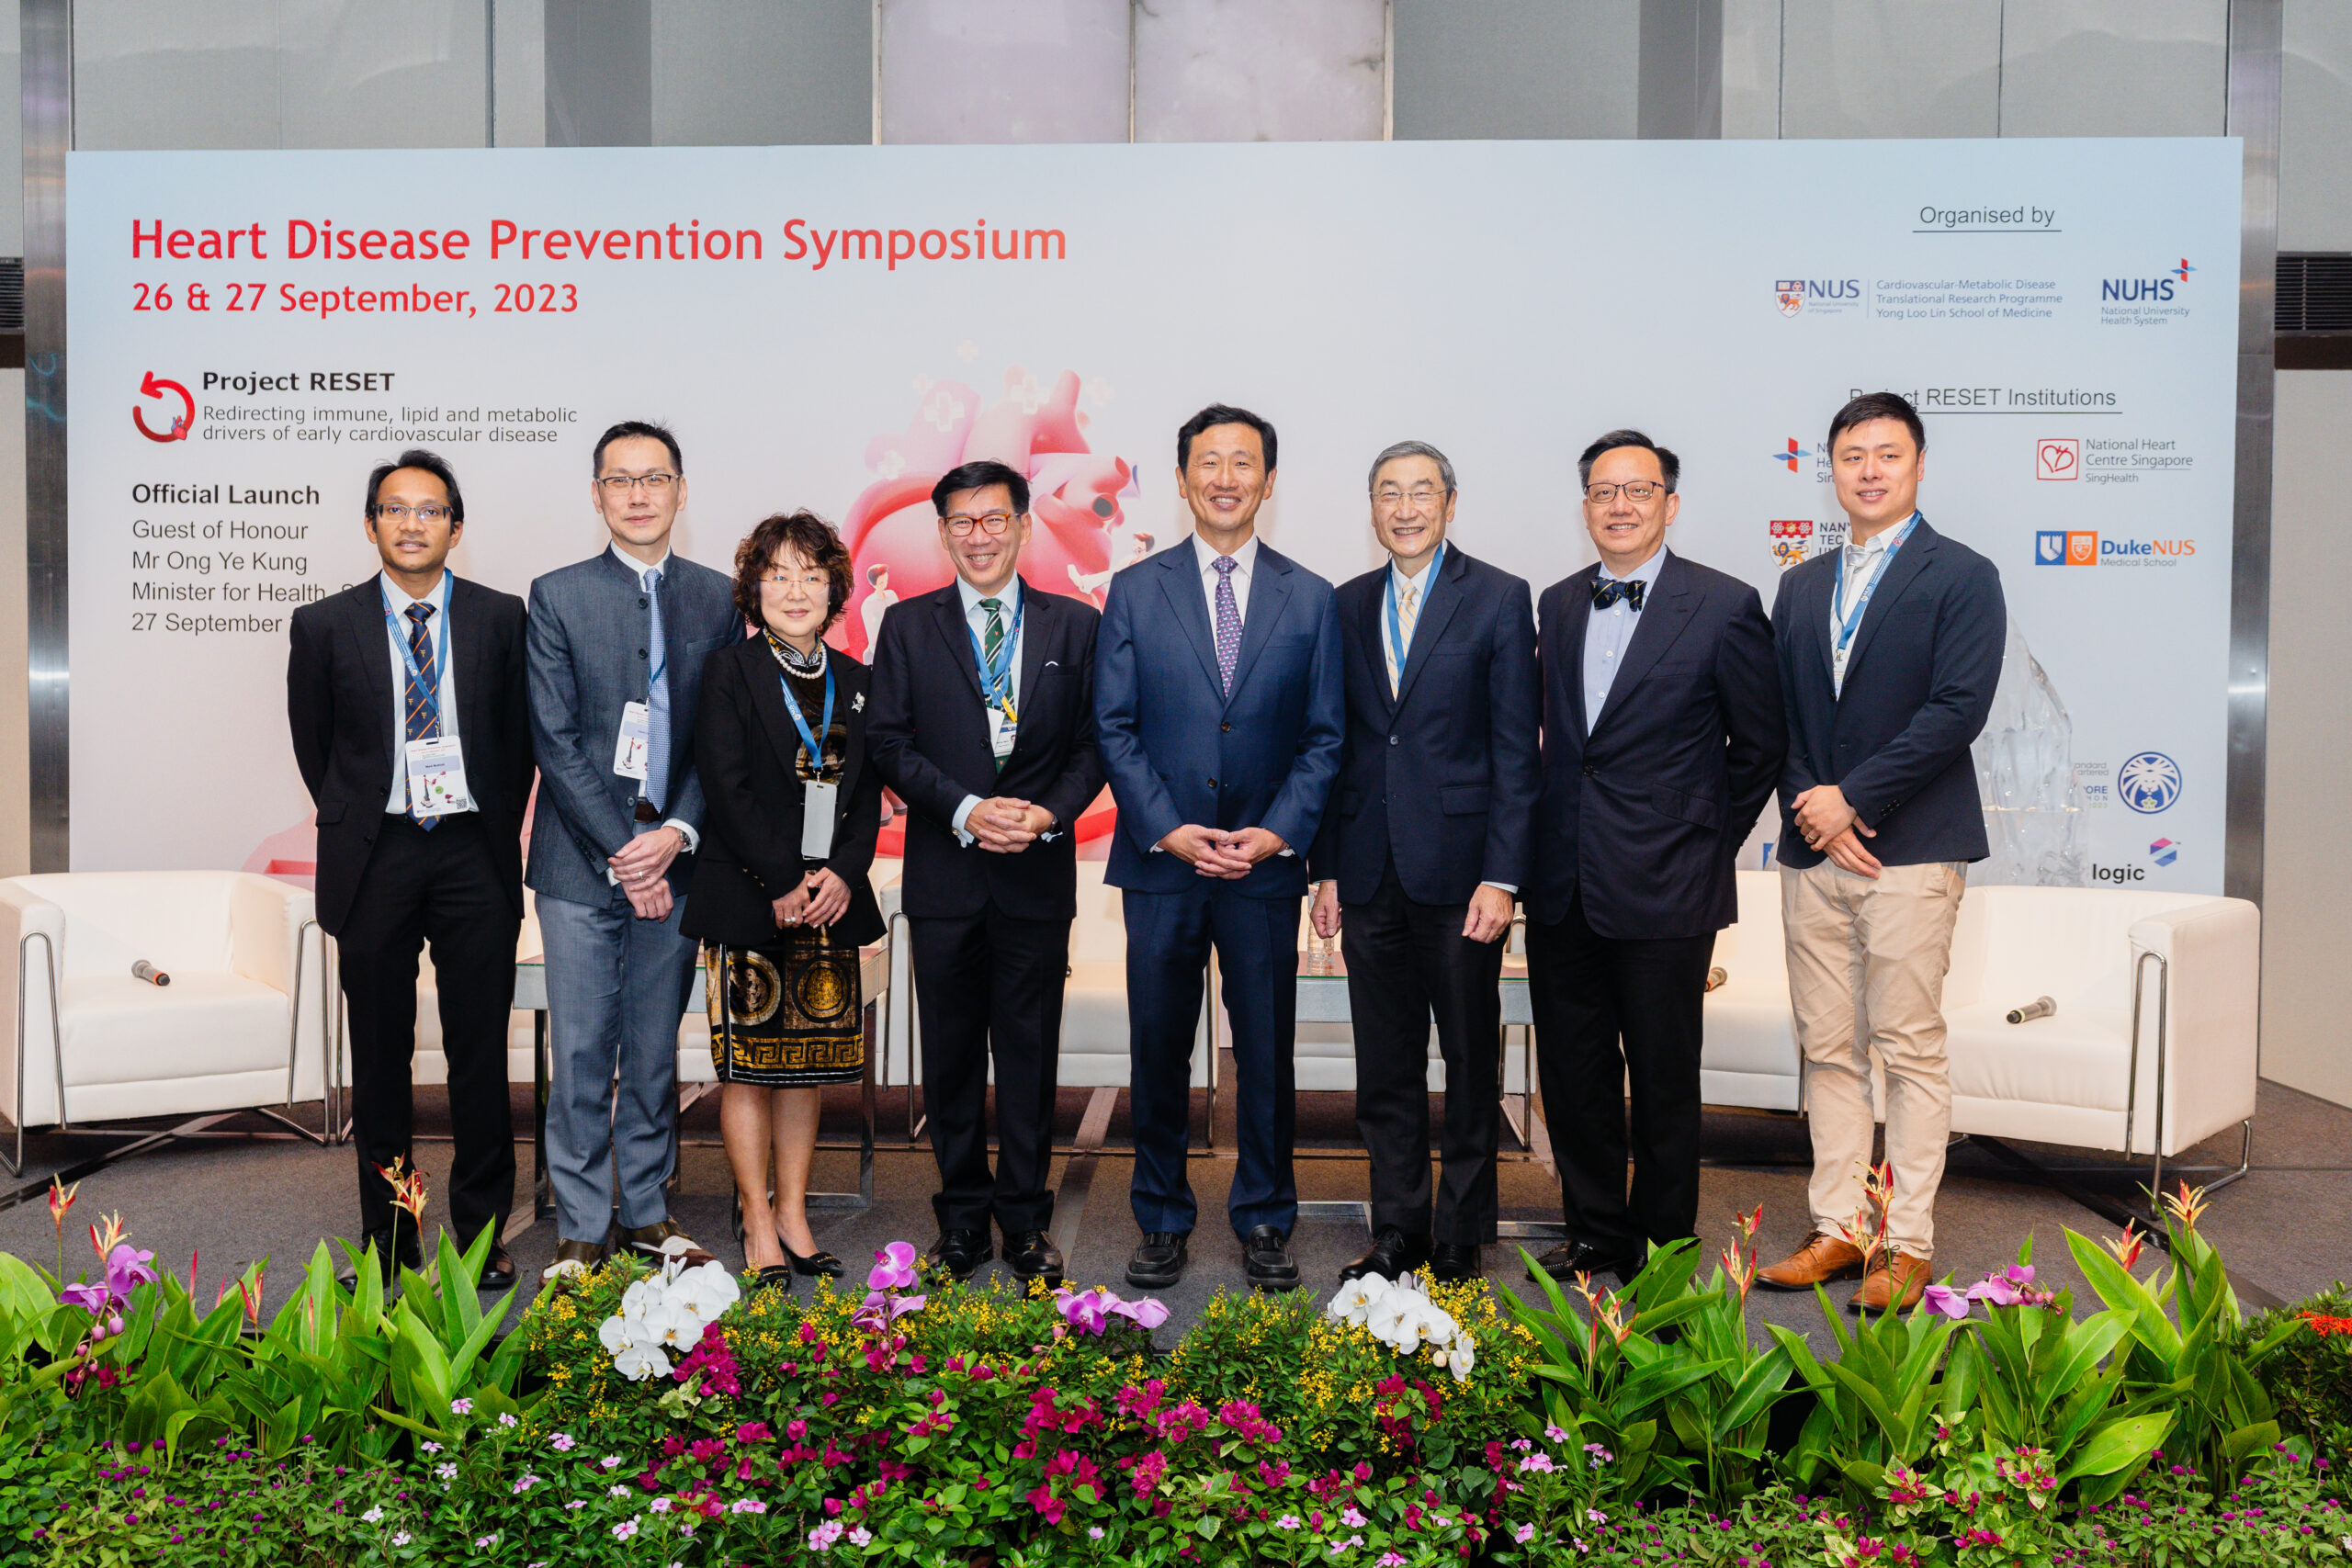 Project RESET, a nationwide preventive heart health study spearheaded by NUS Medicine was launched on 27 September 2023. The event was graced by the Guest-of-Honour, Minister for Health, Mr Ong Ye Kung (fourth from right).